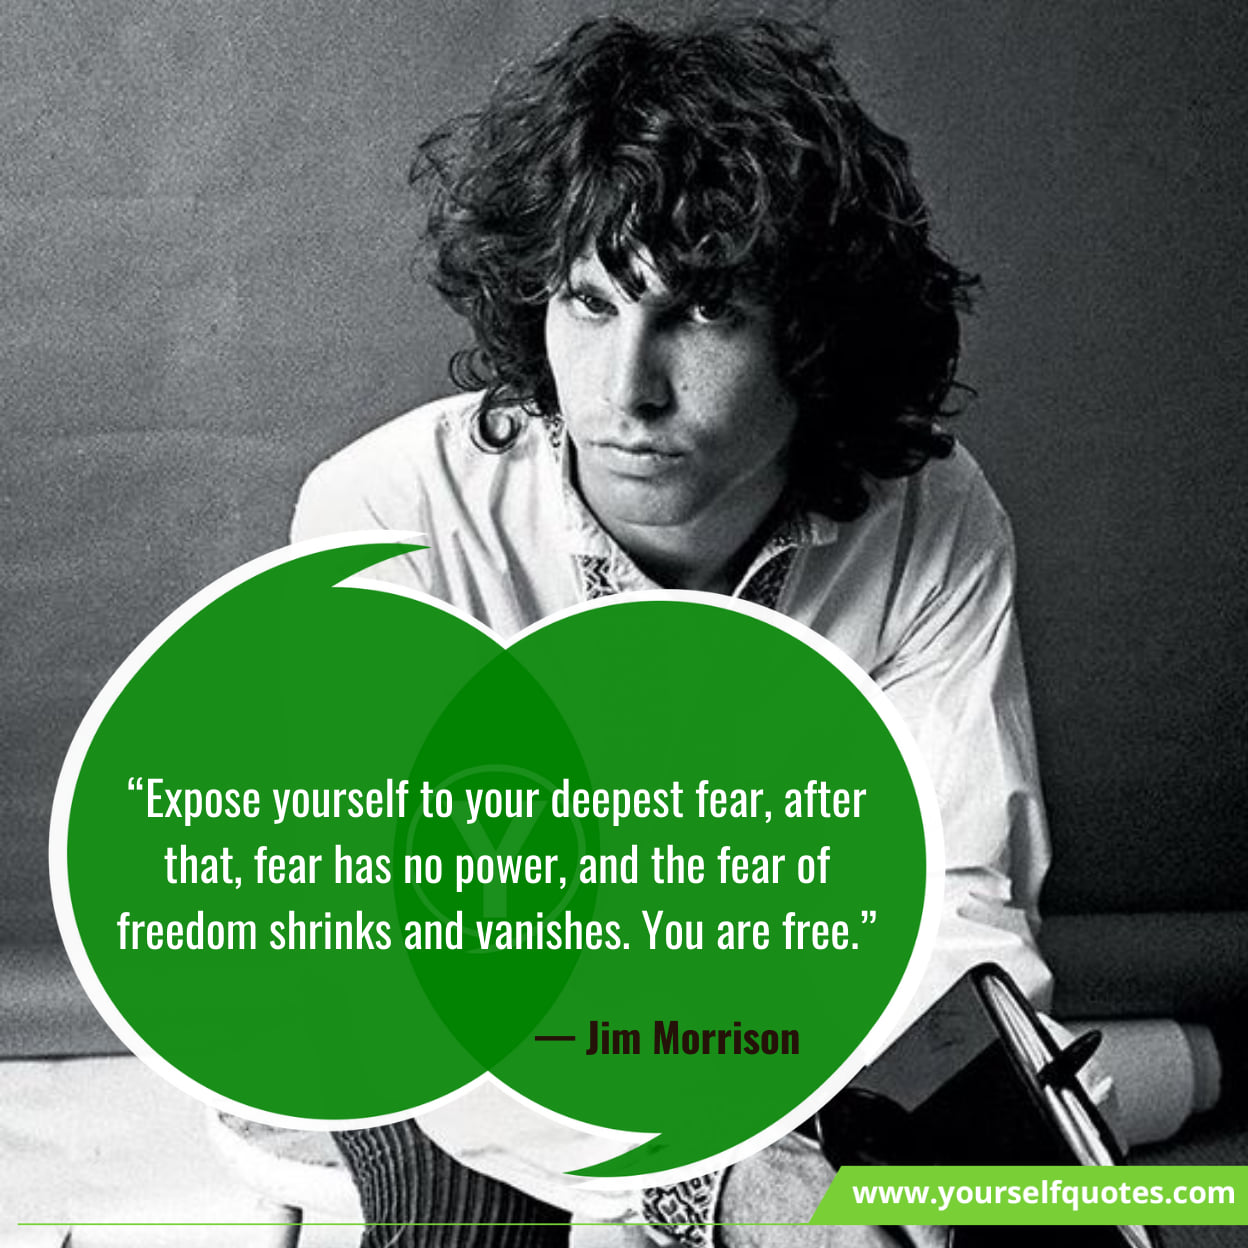 Jim Morrison Quotes About Freedom